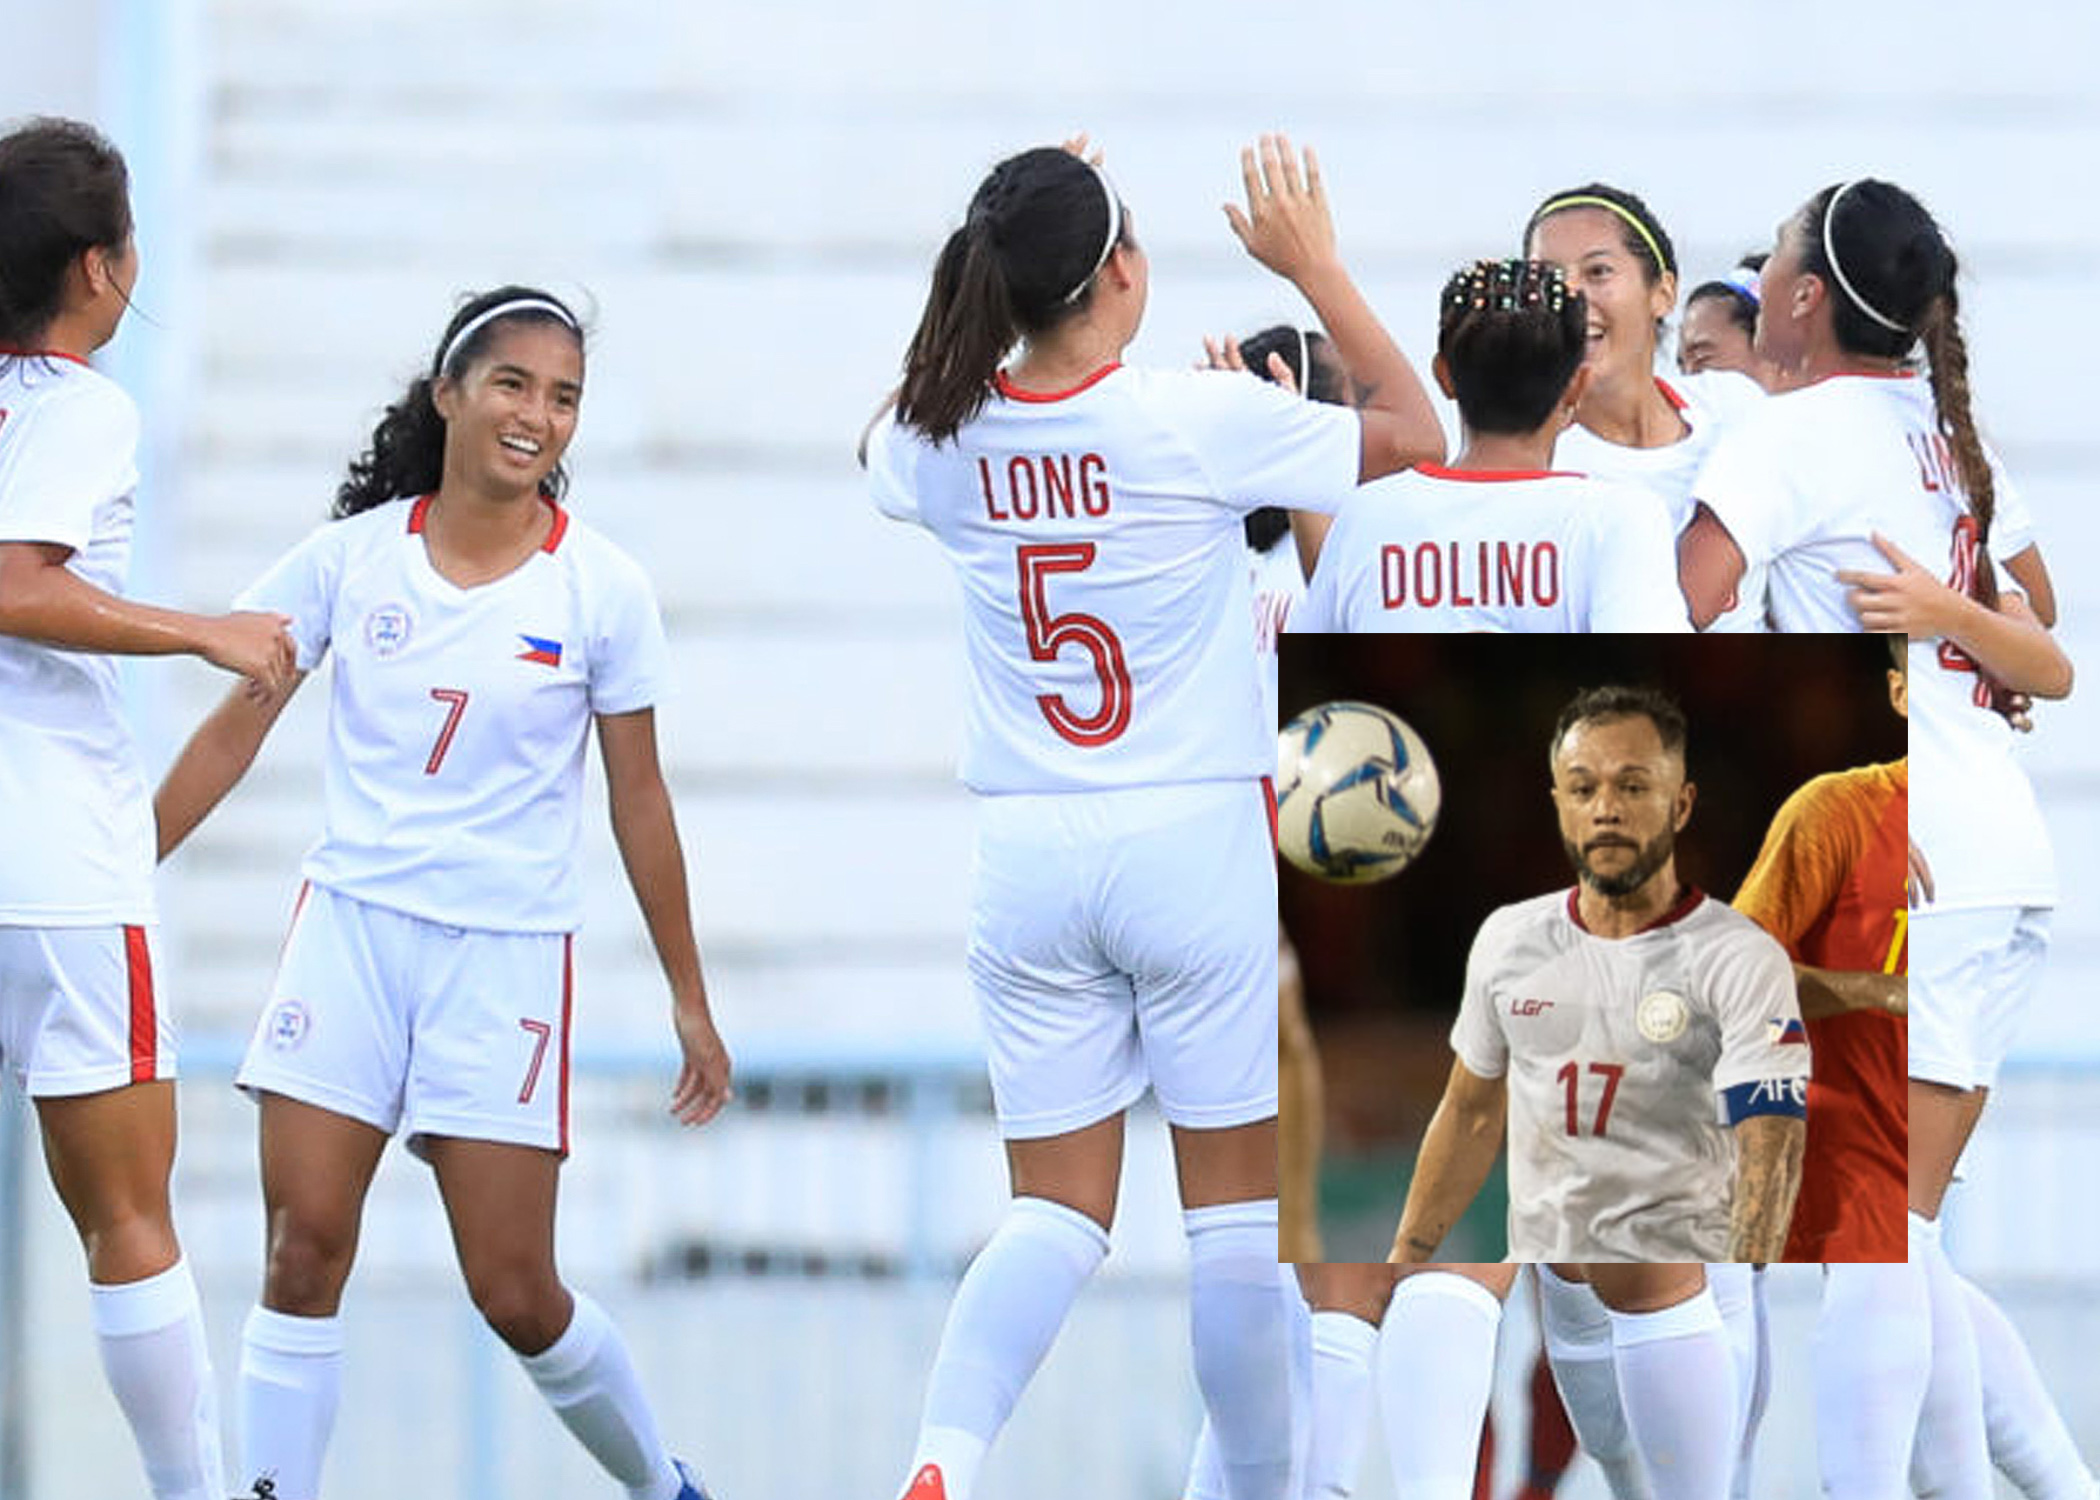 PH to host AFF Women’s Championship, Schrock named one of region’s best